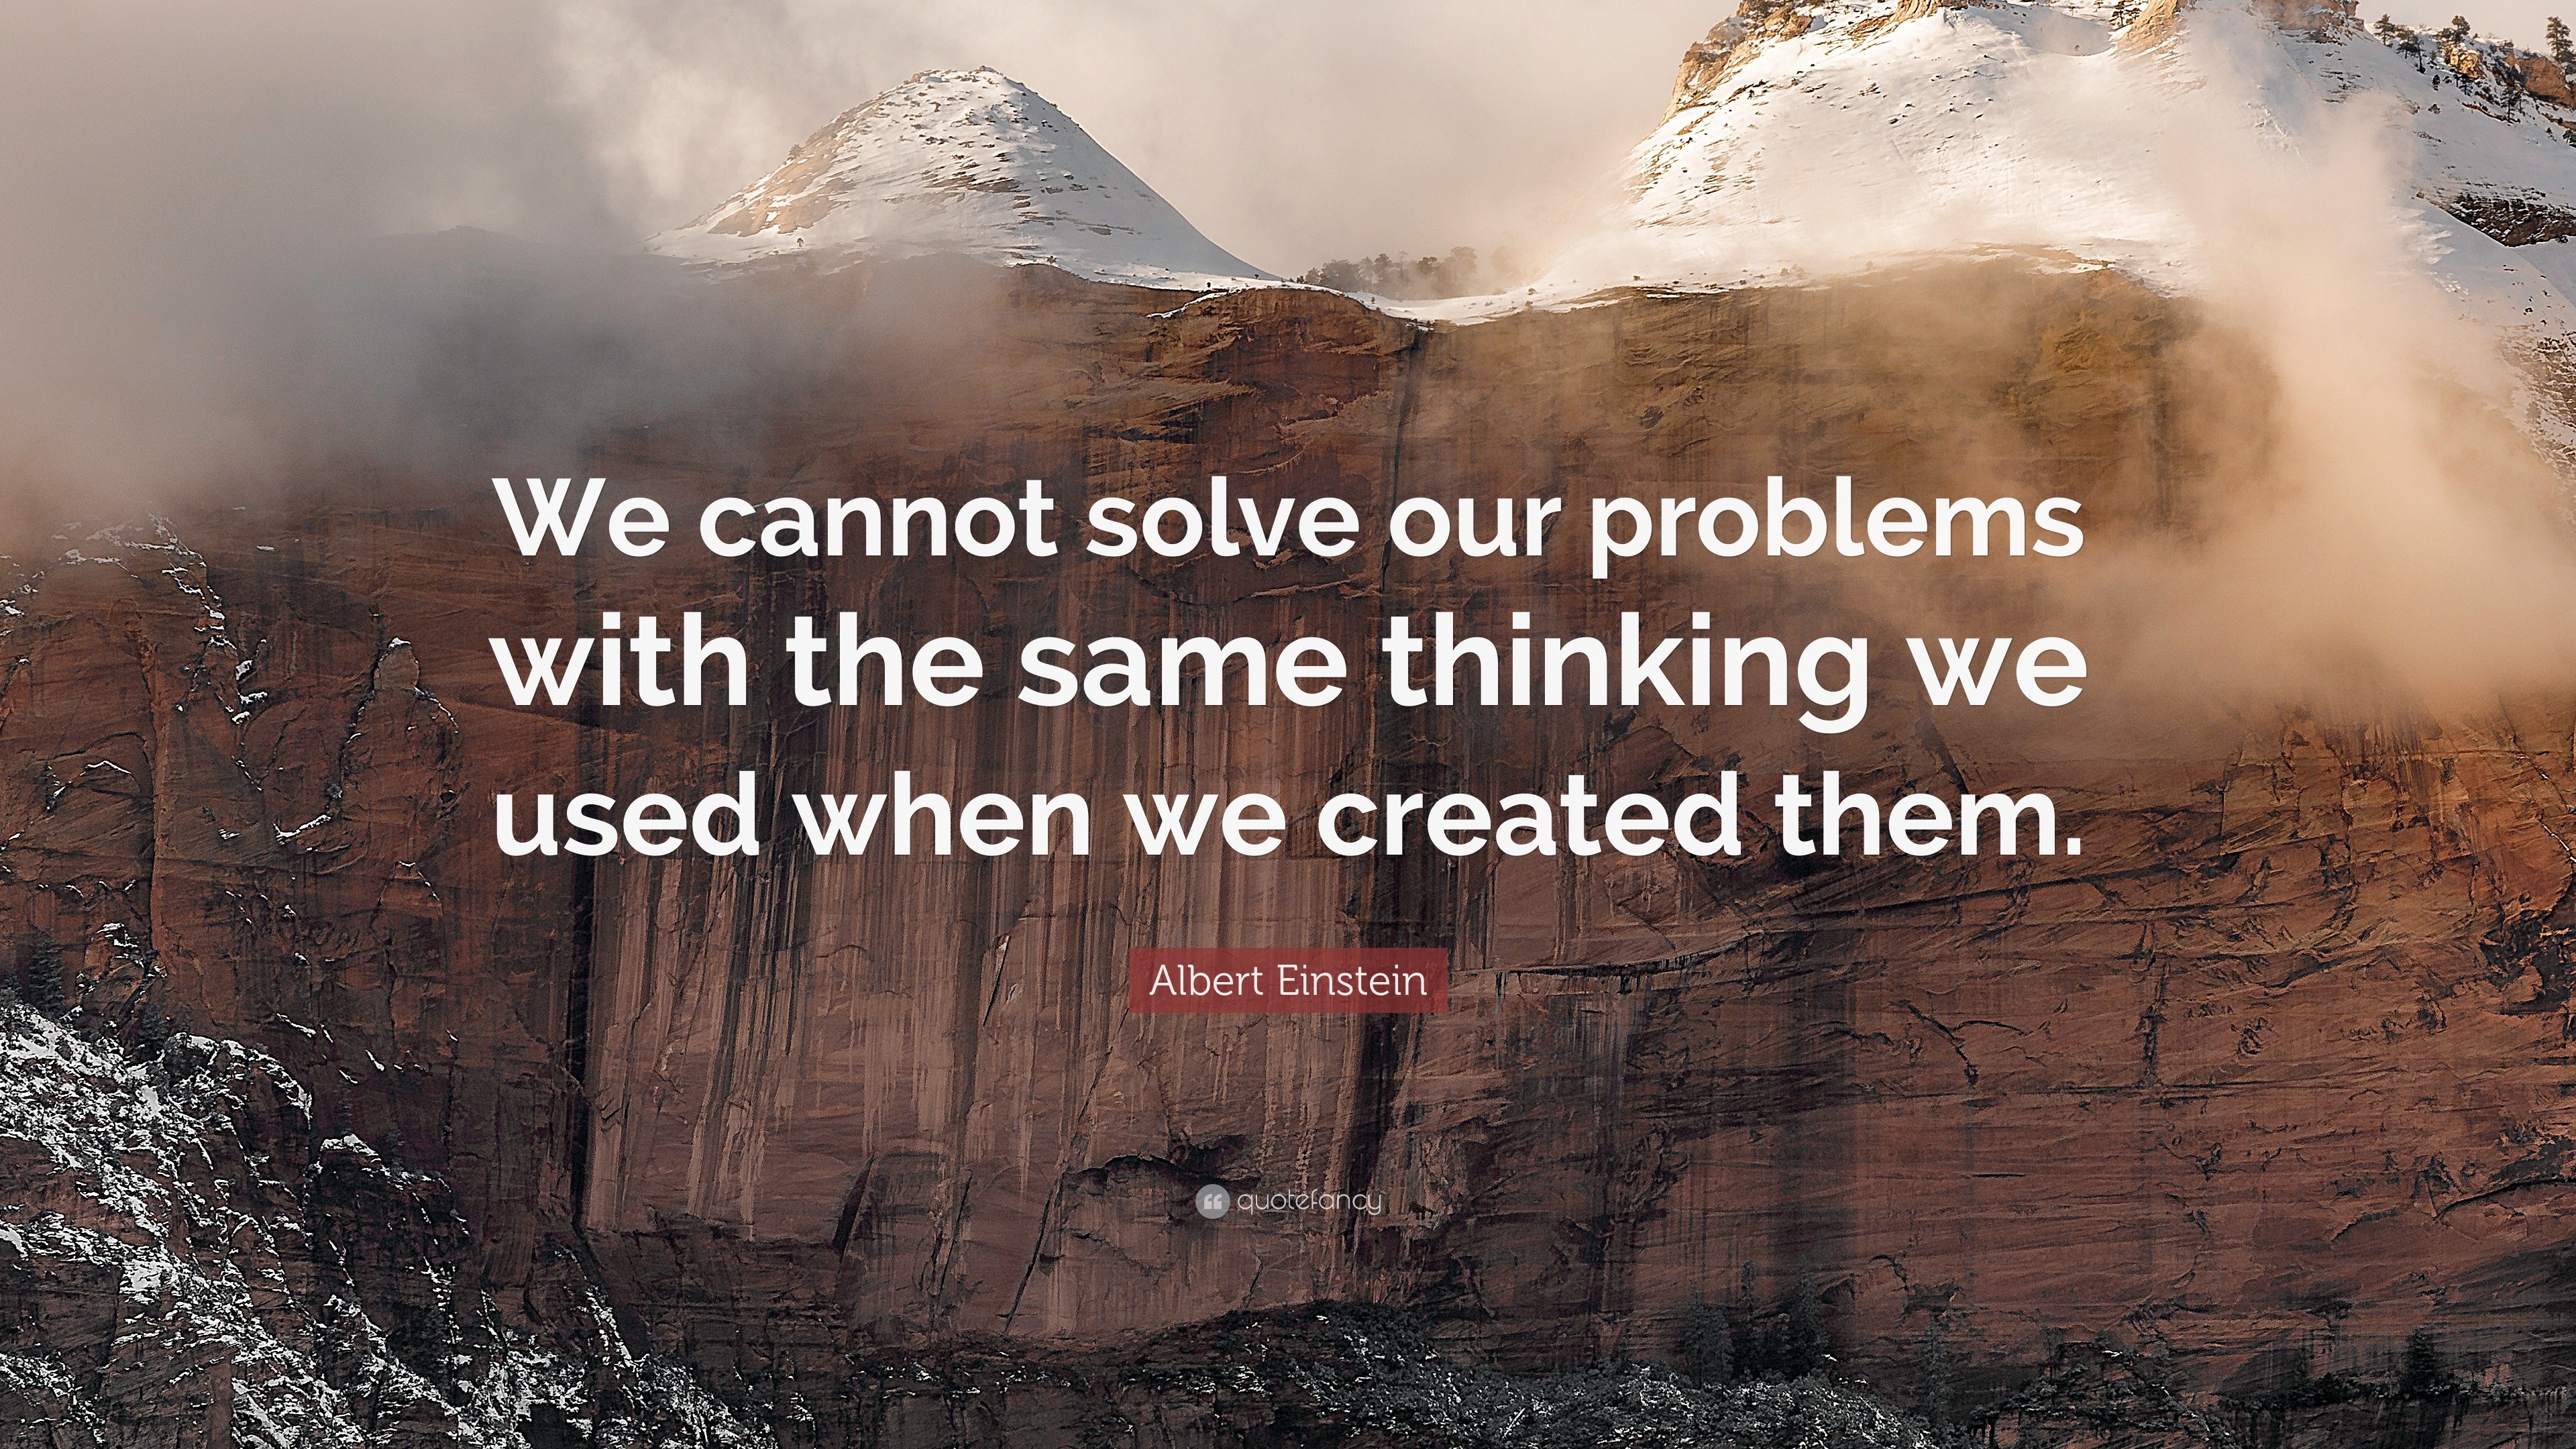 solve your problems quotes